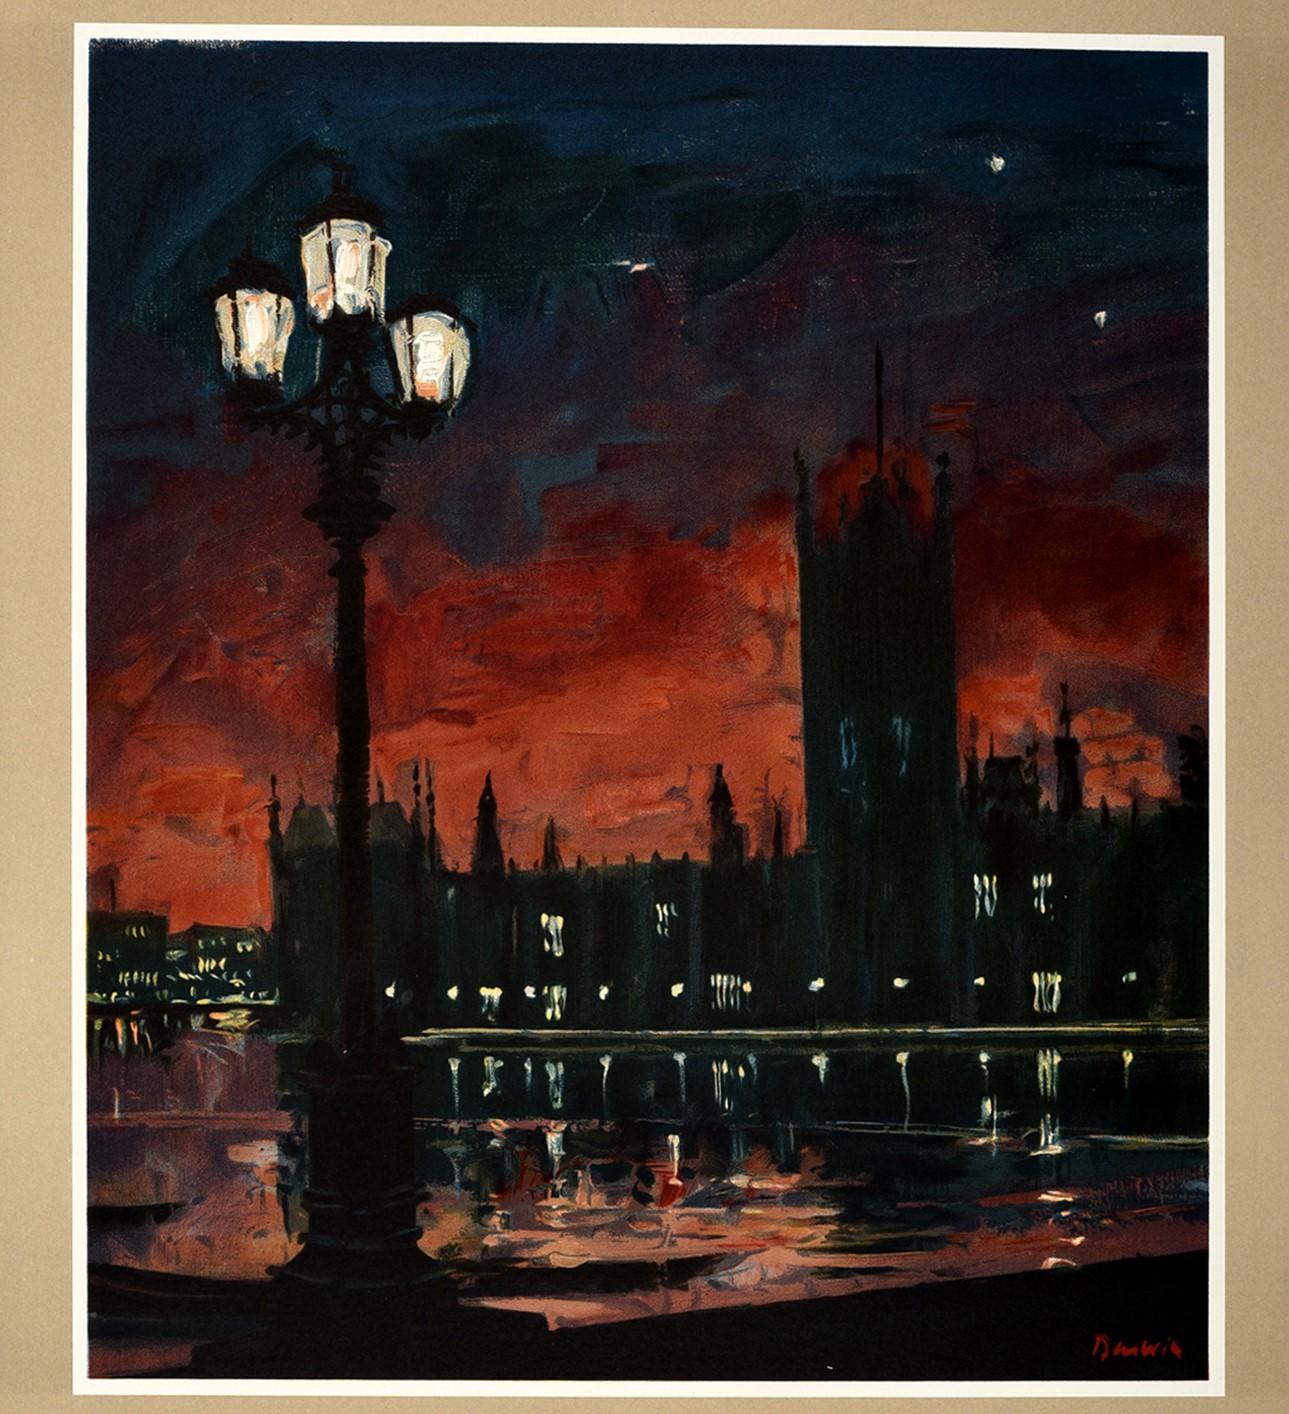 British Original Vintage London Electricity Board Poster The Power Of London Parliament